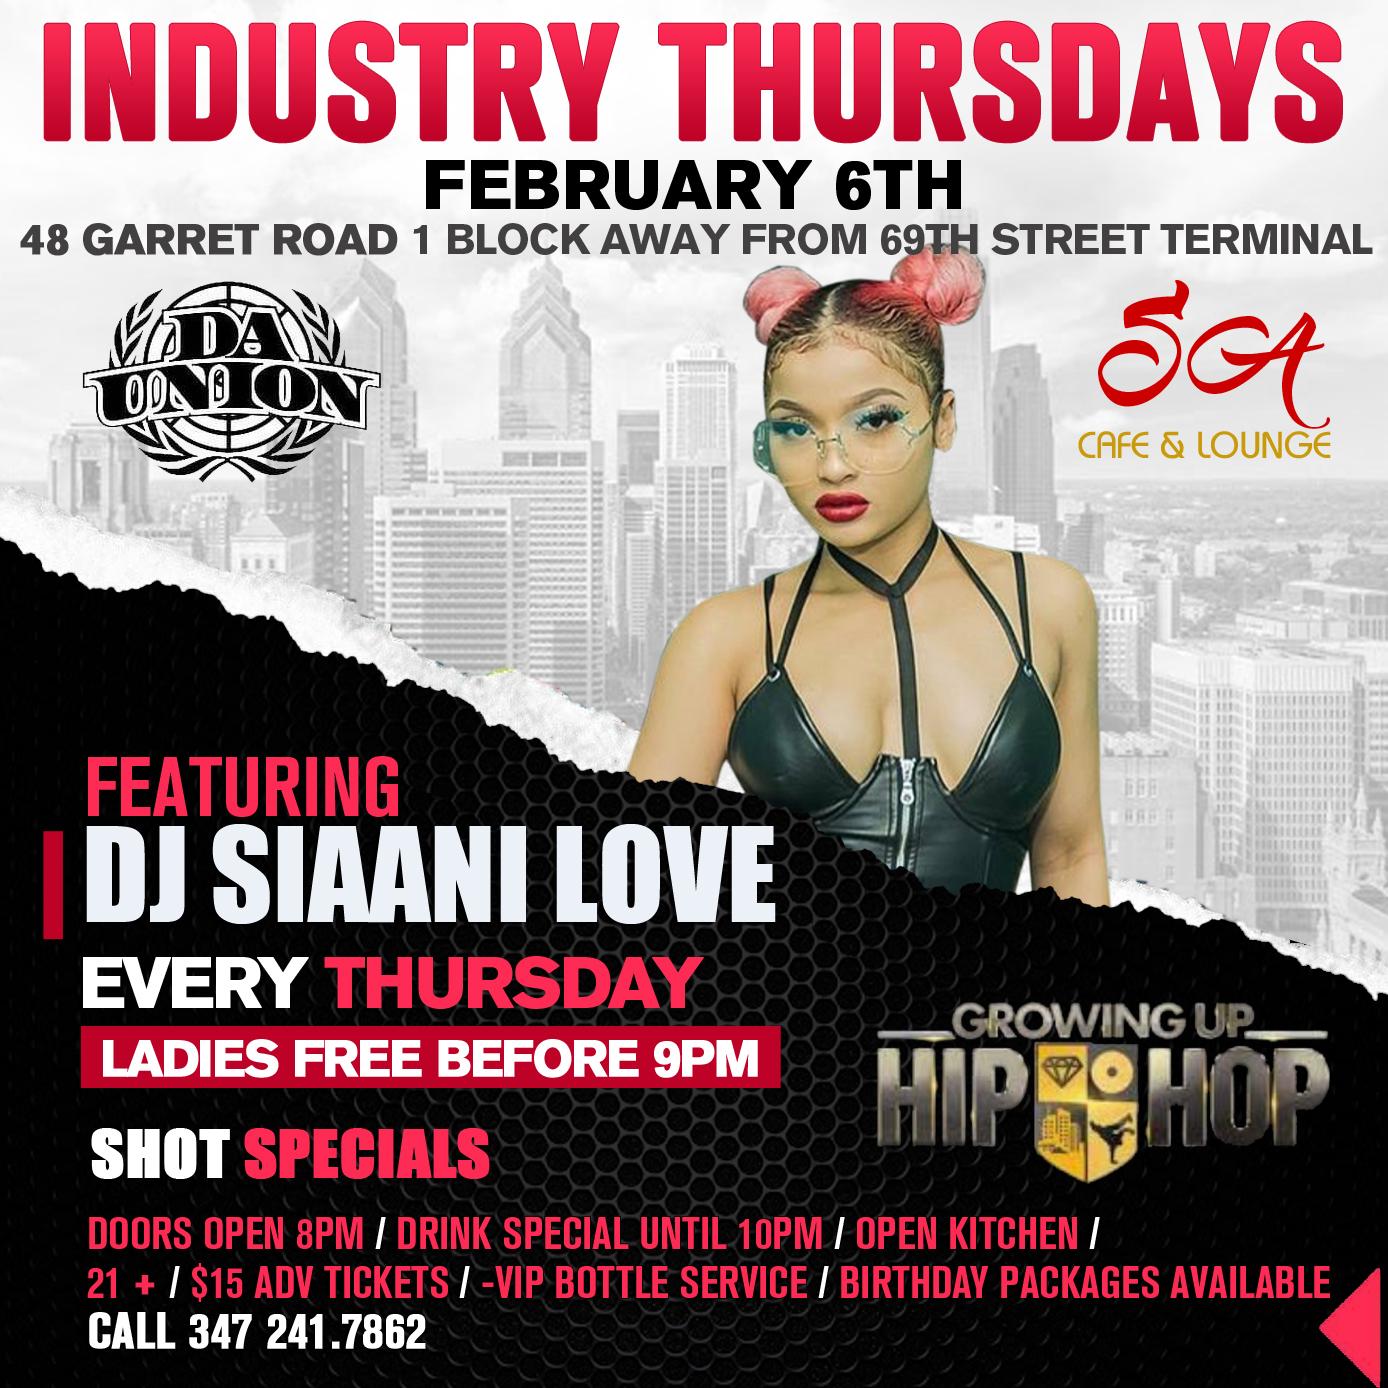 Industry Thursday's Featuring DJ Sianni Love